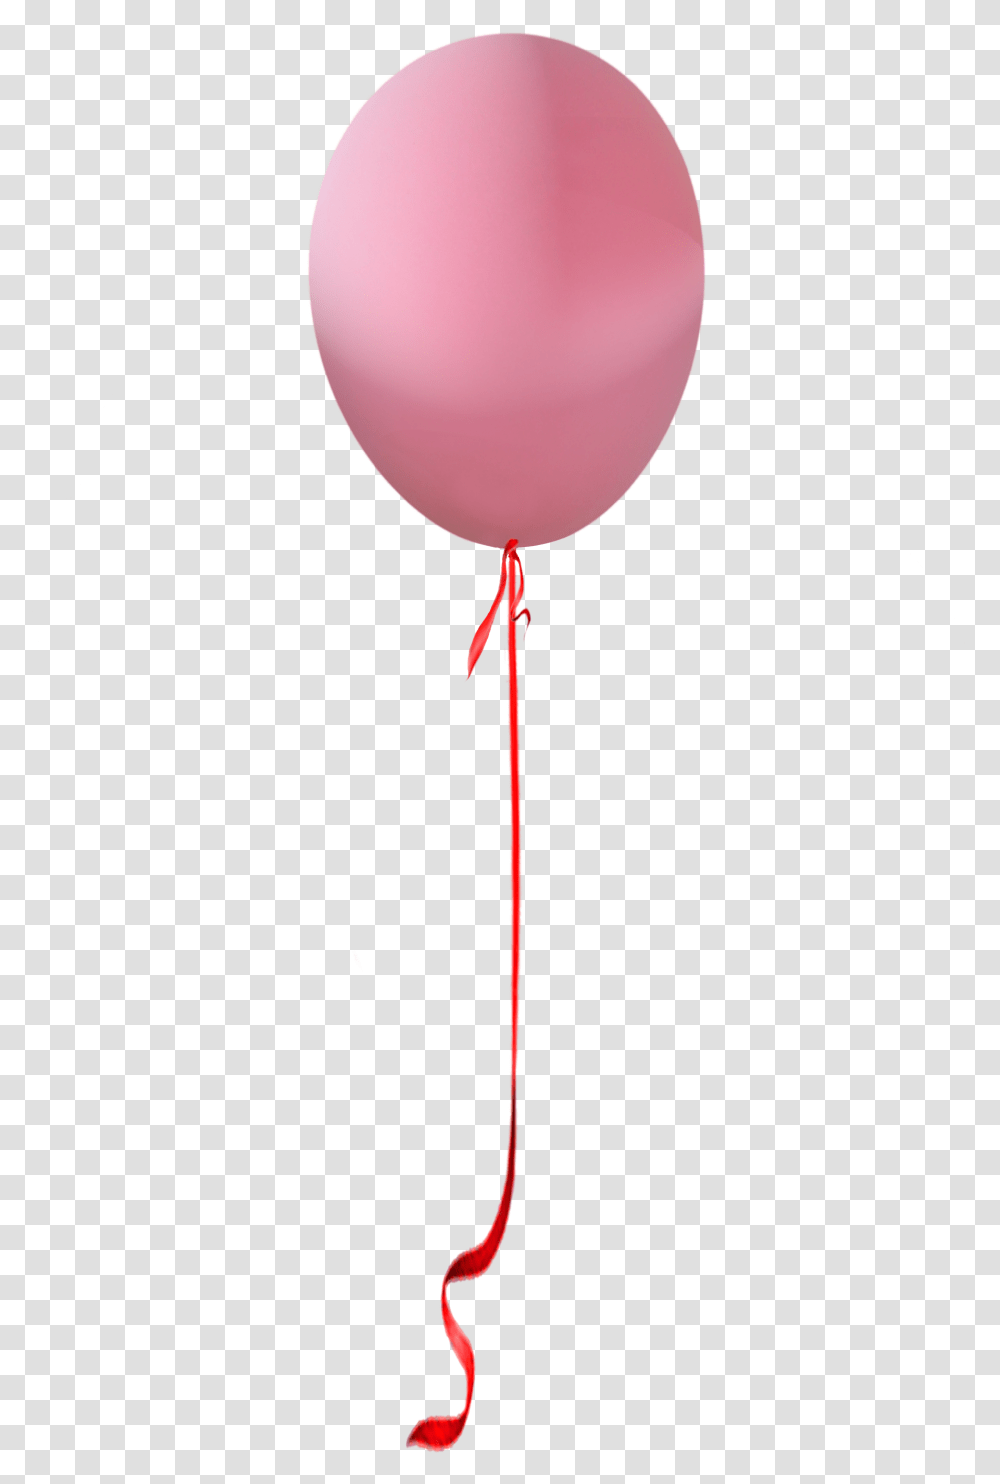 Balon Balloon With String Transparent Png